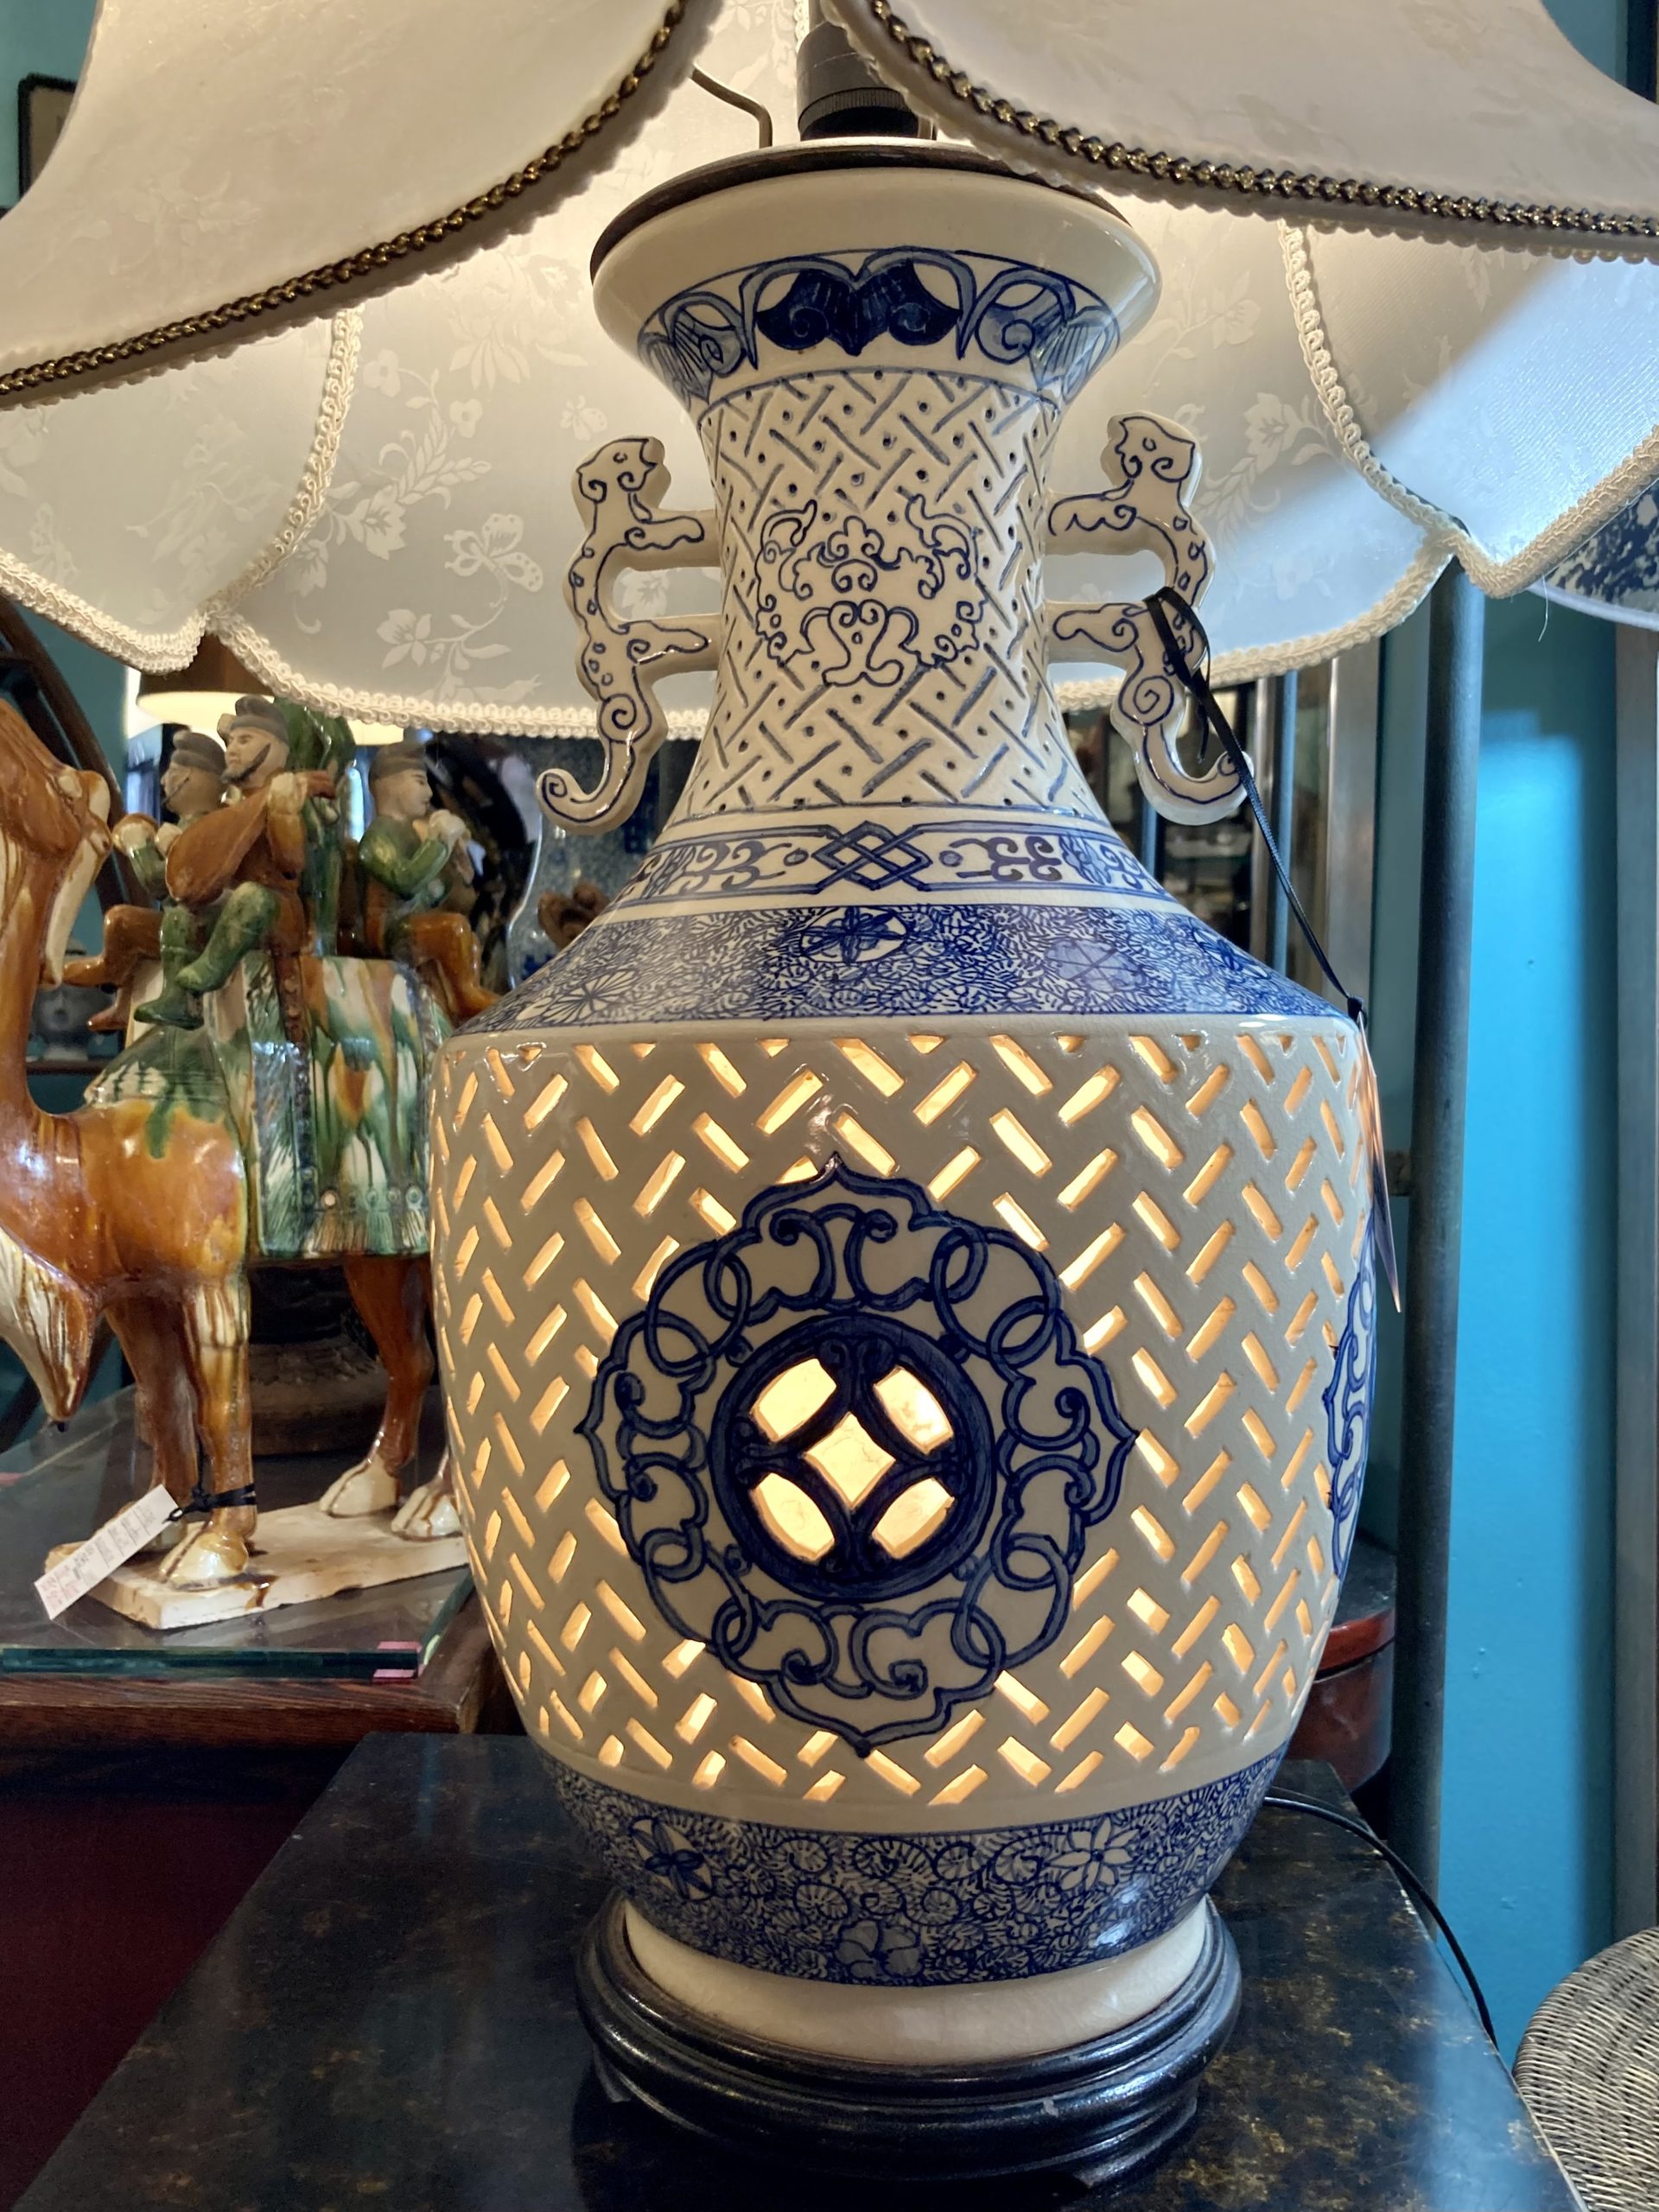 Blue and White Chinese Porcelain Lamp